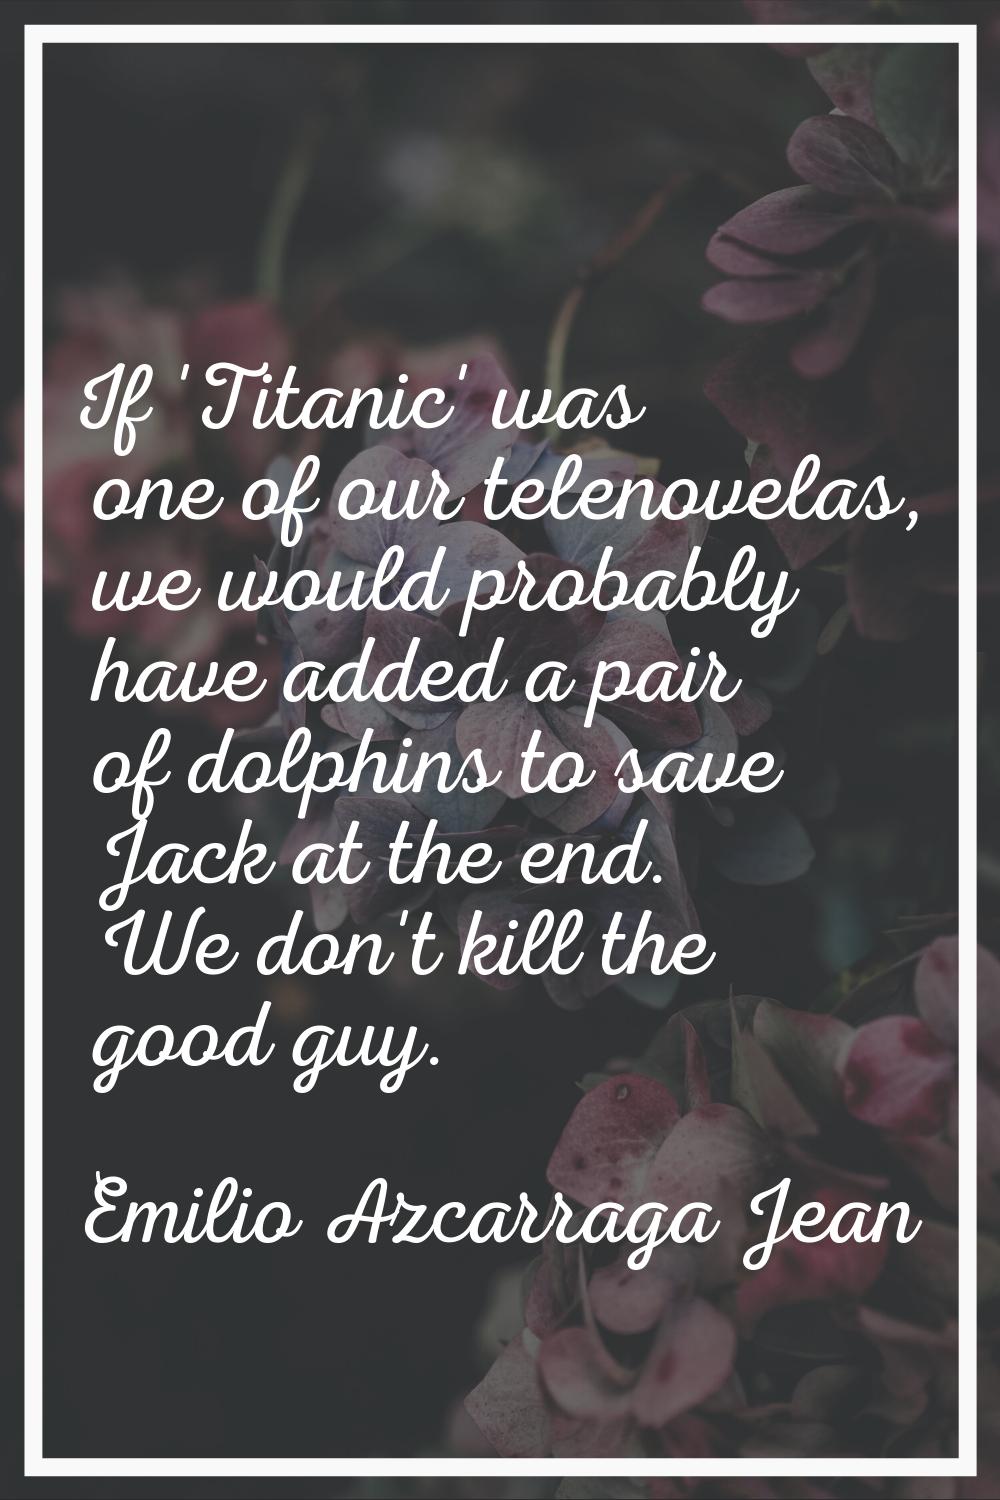 If 'Titanic' was one of our telenovelas, we would probably have added a pair of dolphins to save Ja